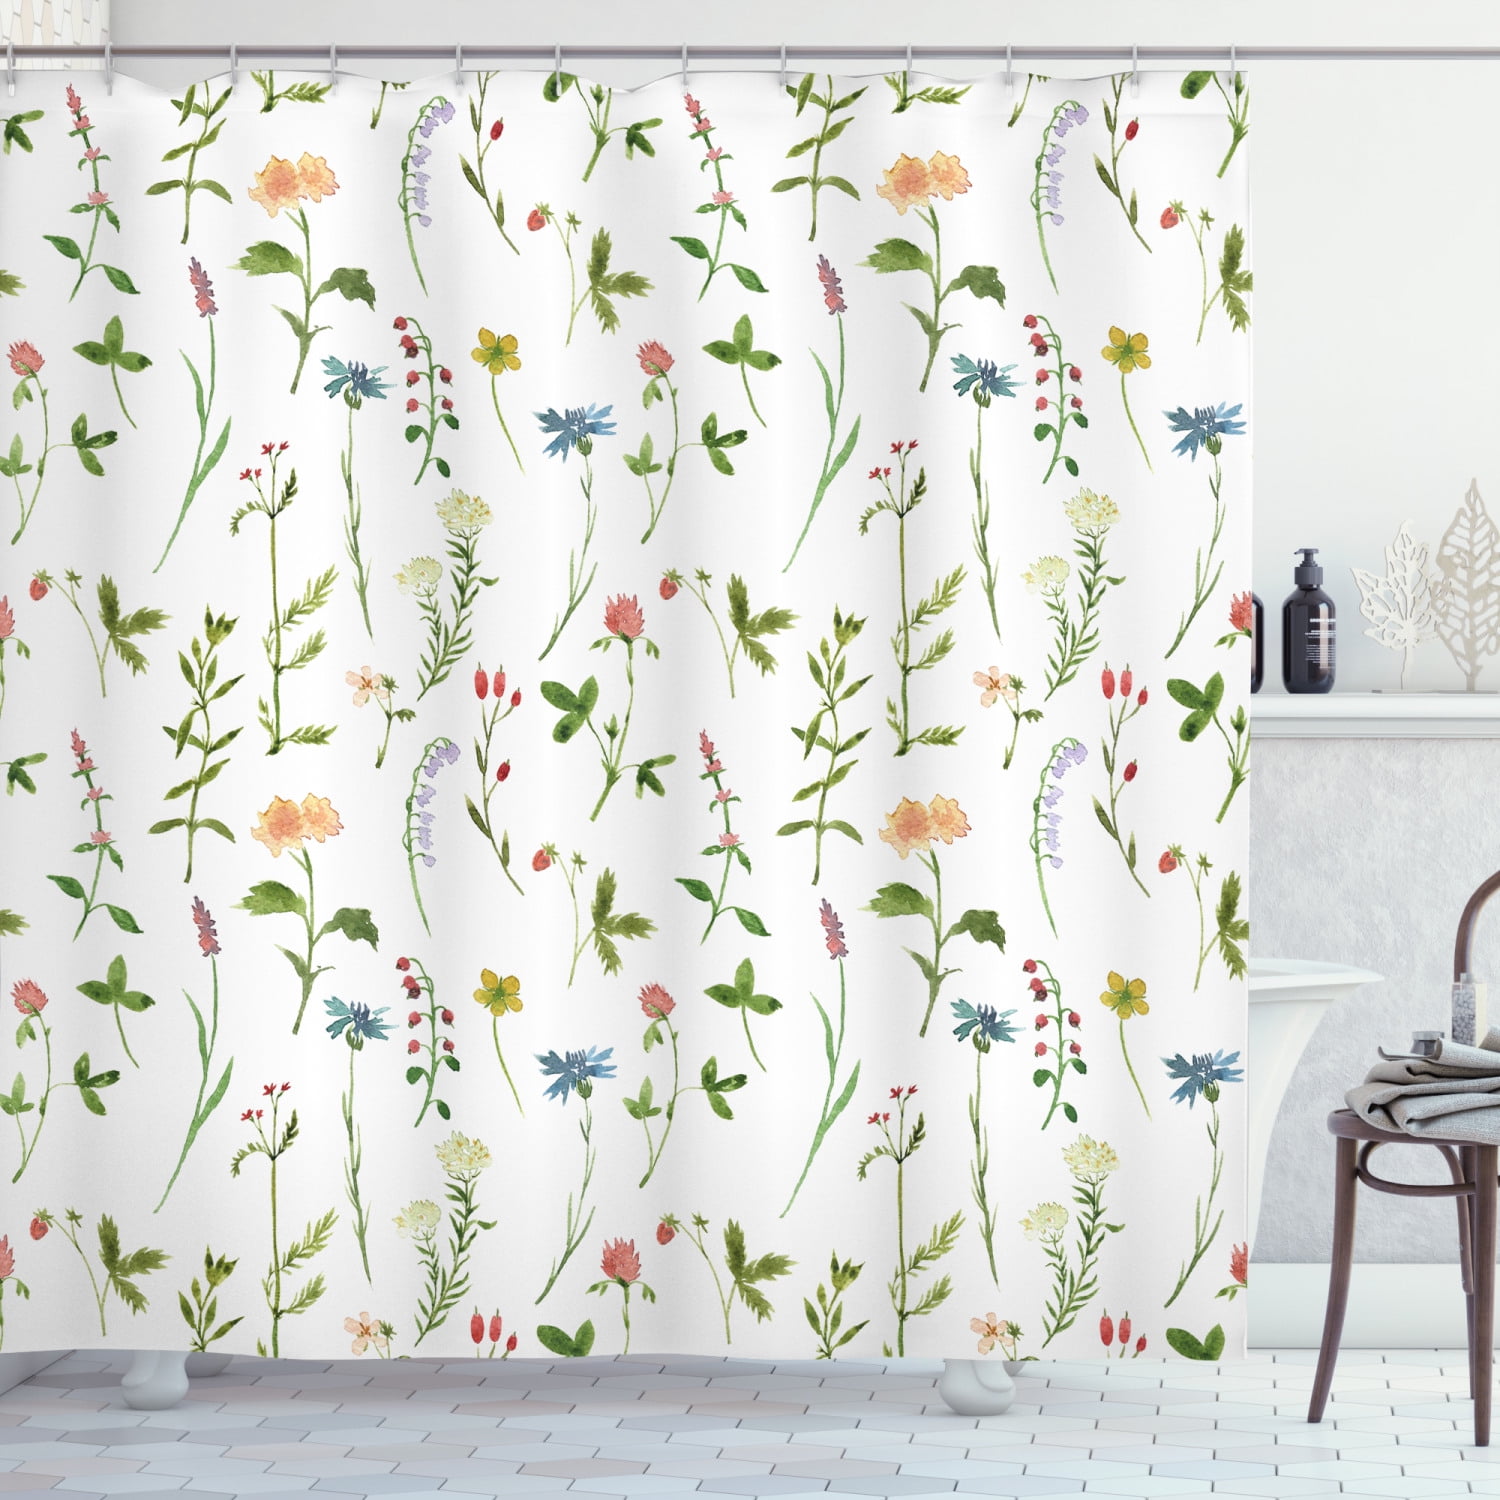 Floral Shower Curtain, Spring Season Themed Watercolors Painting of Herbs  Flowers Botanical Garden Artwork, Fabric Bathroom Set with Hooks, 69W X 84L  